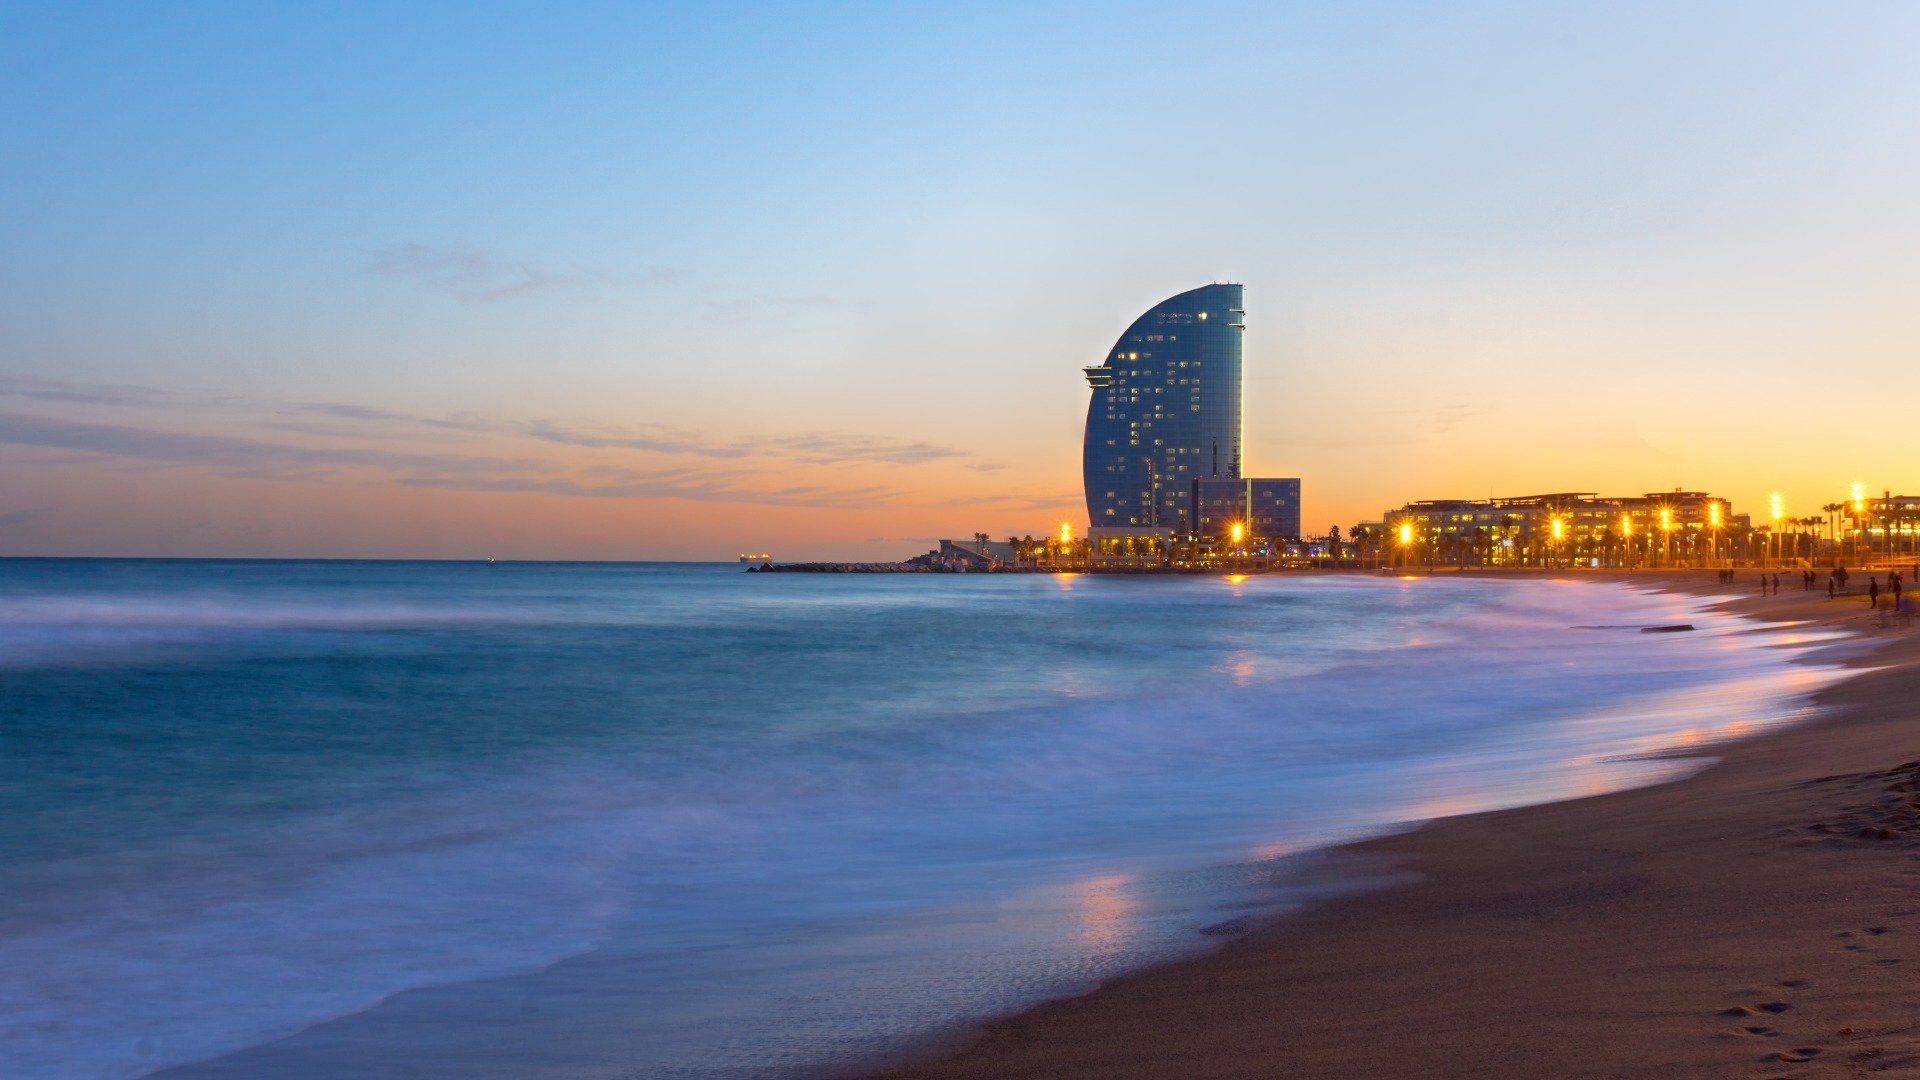 In the background, this image shows the iconic sail-shaped building that dominates La Barceloneta. In the foreground, the waves and the sand dyed in sunset colors. 